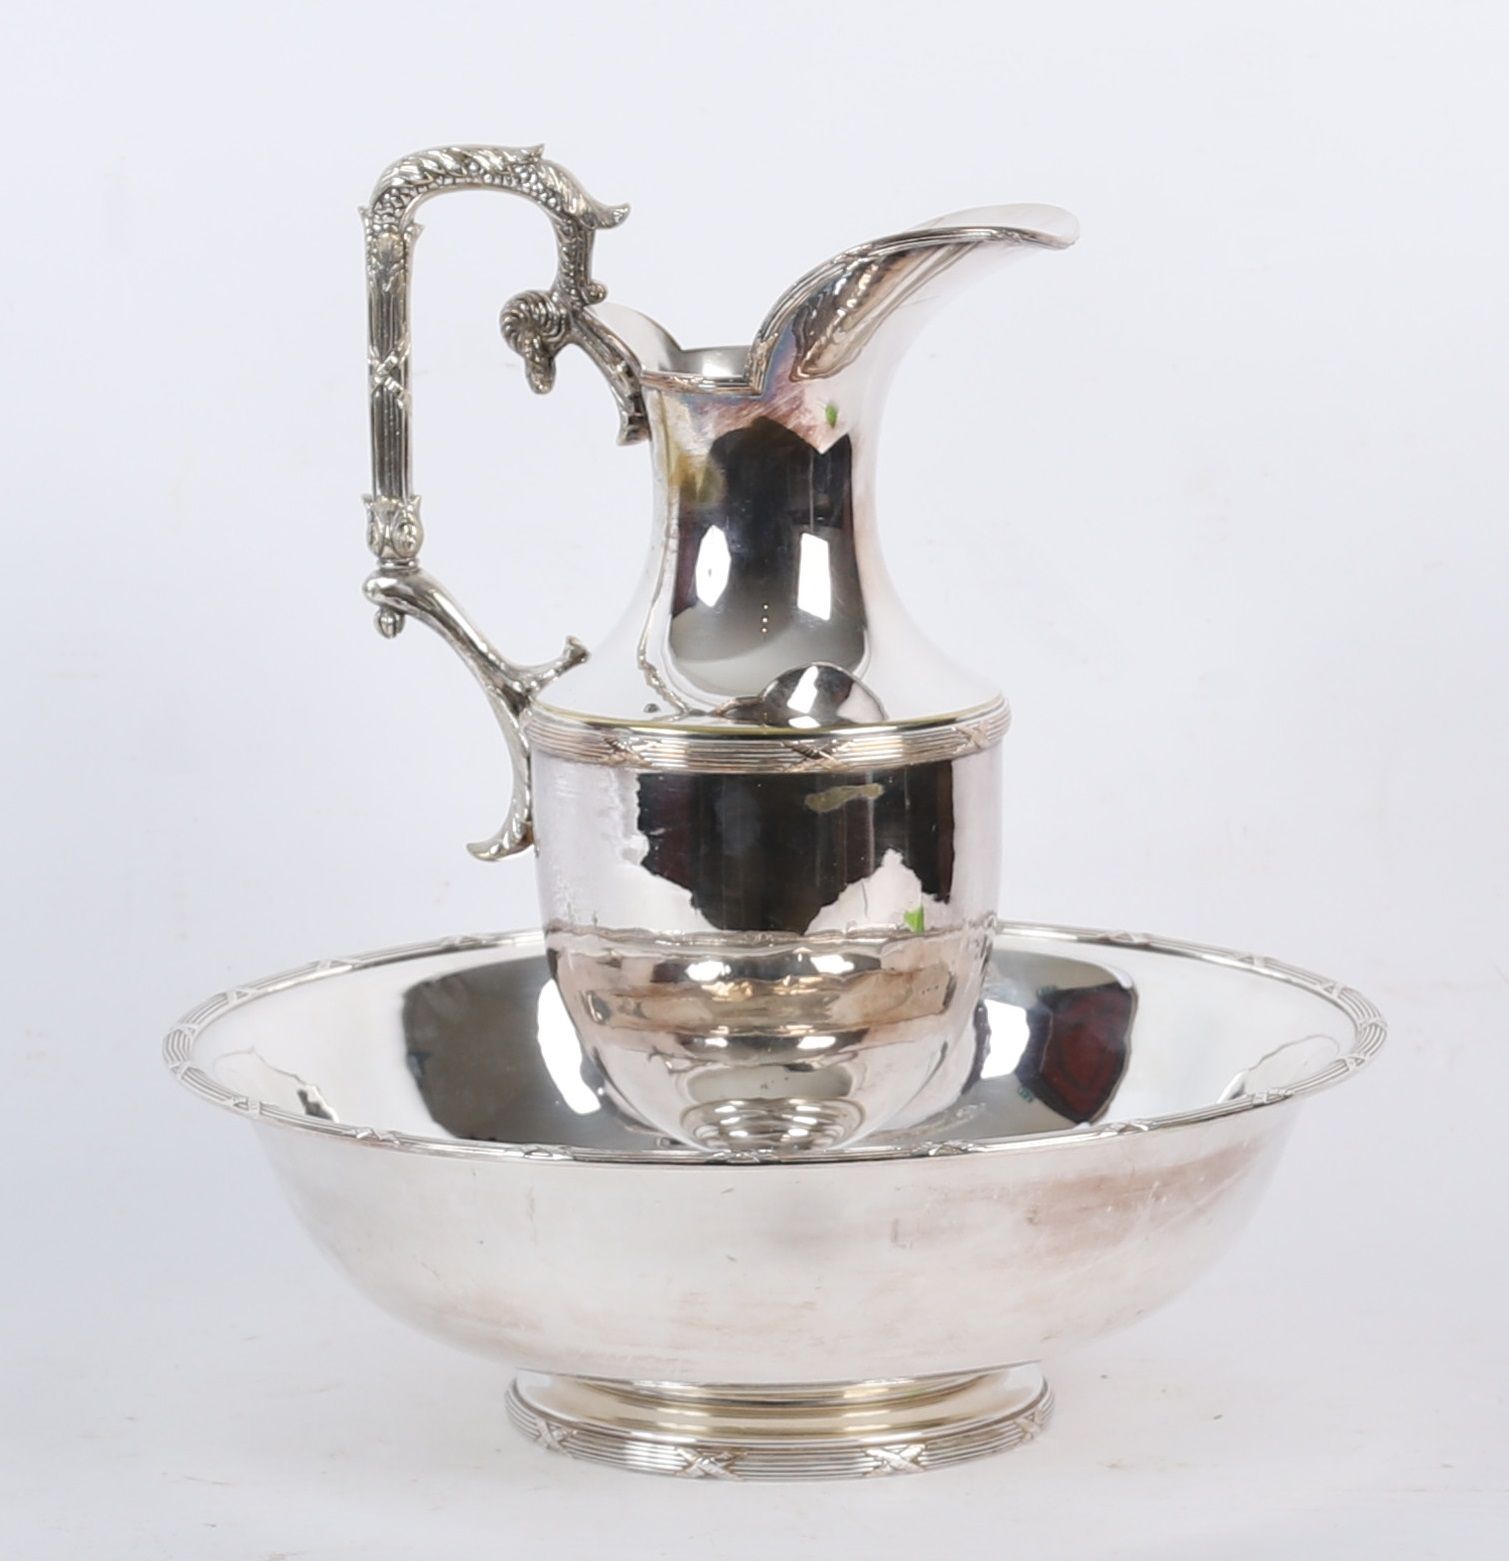 Null LARGE EWER AND ITS BASIN OUT OF SILVER PLATED METAL
Decorated with fluted f&hellip;